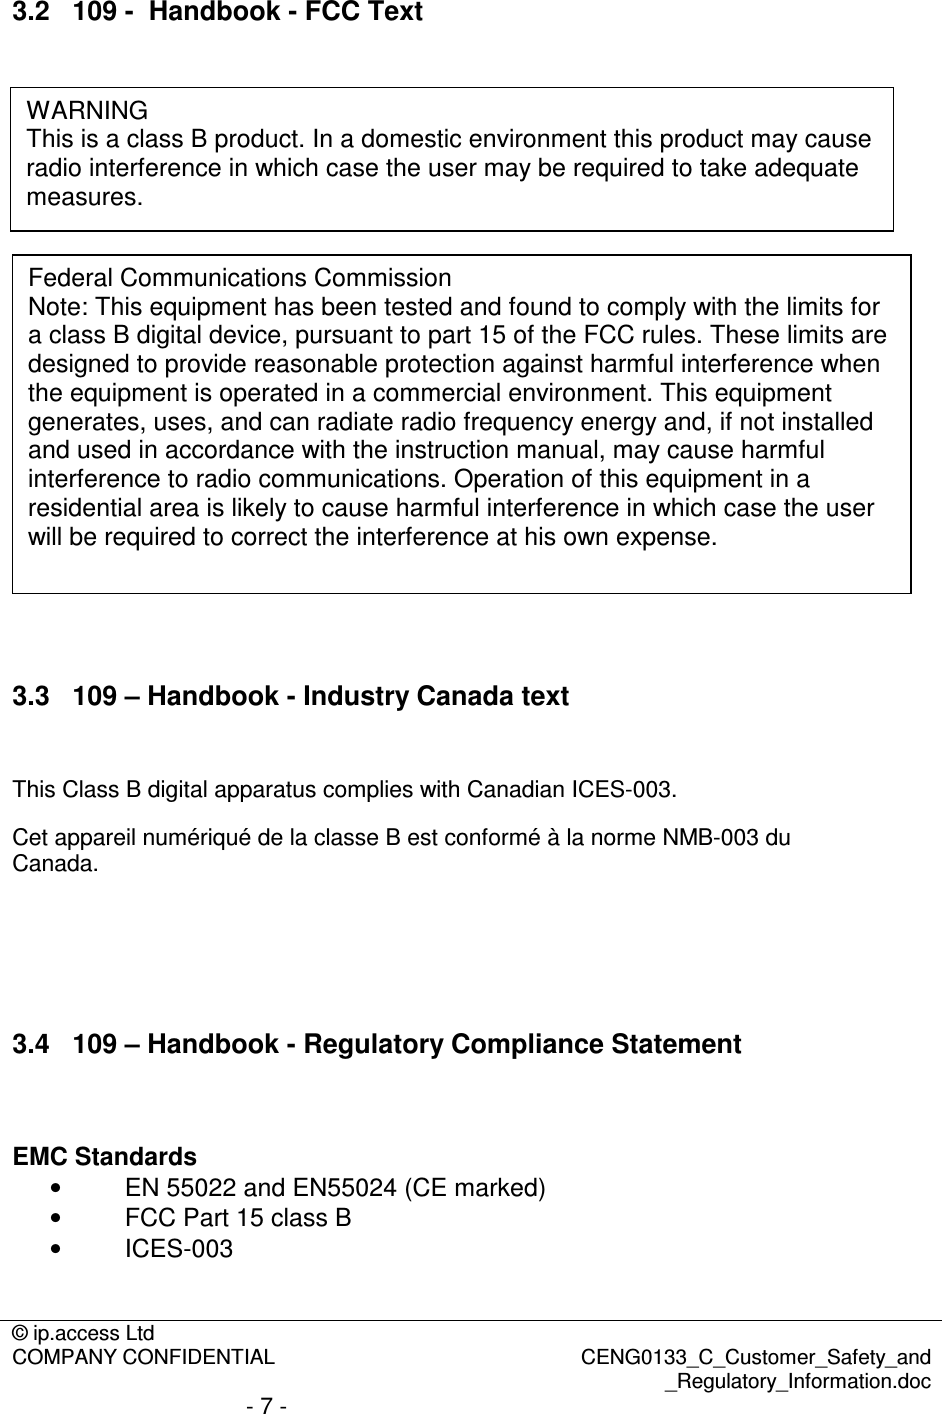 © ip.access Ltd  COMPANY CONFIDENTIAL  CENG0133_C_Customer_Safety_and _Regulatory_Information.doc - 7 -  3.2  109 -  Handbook - FCC Text                      3.3  109 – Handbook - Industry Canada text  This Class B digital apparatus complies with Canadian ICES-003. Cet appareil numériqué de la classe B est conformé à la norme NMB-003 du Canada.     3.4  109 – Handbook - Regulatory Compliance Statement   EMC Standards •  EN 55022 and EN55024 (CE marked) •  FCC Part 15 class B •  ICES-003  WARNING This is a class B product. In a domestic environment this product may cause radio interference in which case the user may be required to take adequate measures. Federal Communications Commission Note: This equipment has been tested and found to comply with the limits for a class B digital device, pursuant to part 15 of the FCC rules. These limits are designed to provide reasonable protection against harmful interference when the equipment is operated in a commercial environment. This equipment generates, uses, and can radiate radio frequency energy and, if not installed and used in accordance with the instruction manual, may cause harmful interference to radio communications. Operation of this equipment in a residential area is likely to cause harmful interference in which case the user will be required to correct the interference at his own expense. 